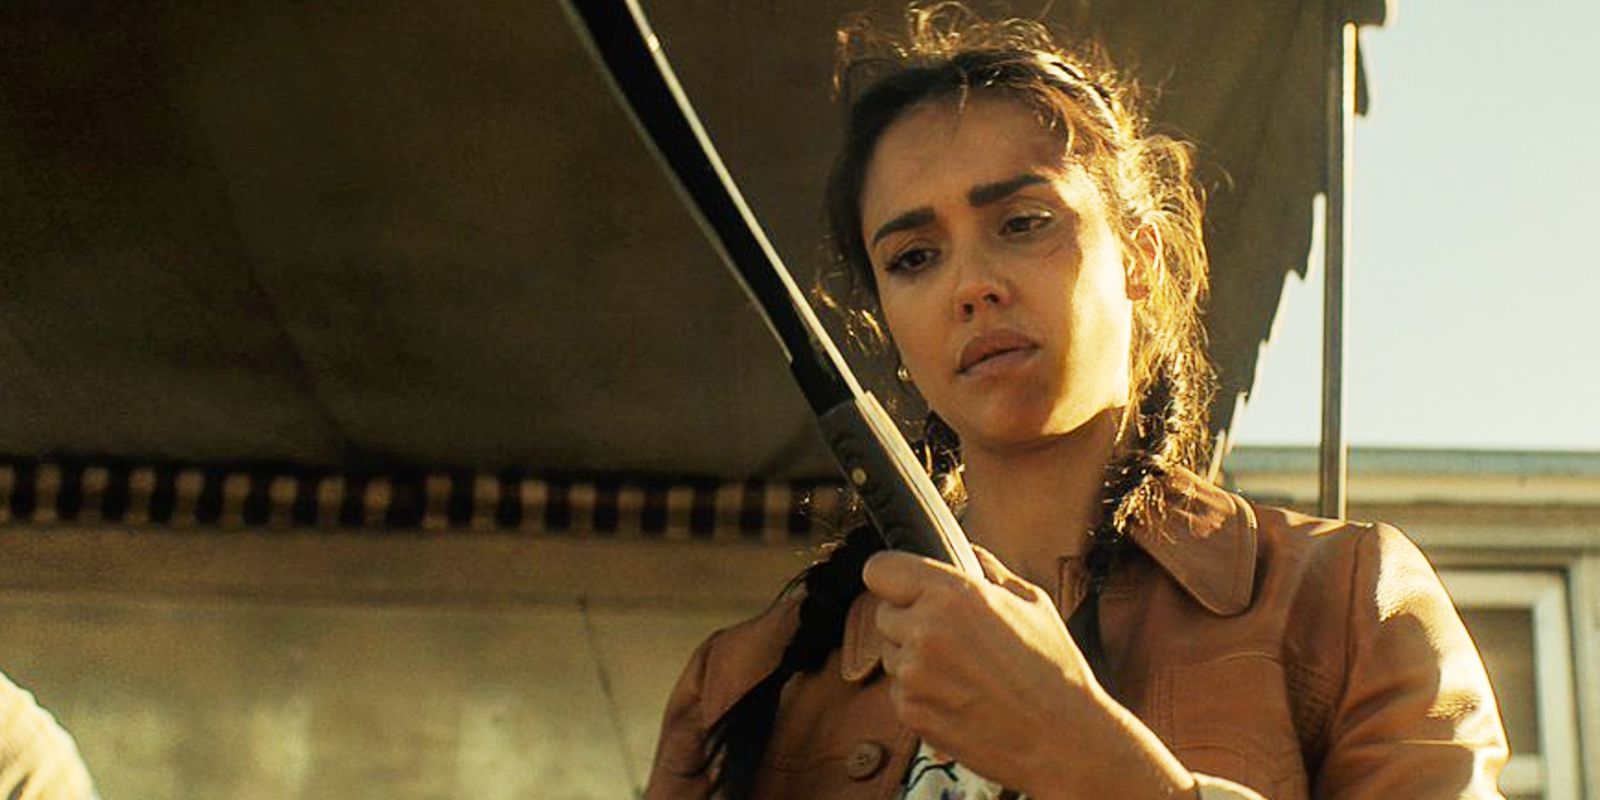 Jessica Alba's Netflix Action Movie Revealed In First Trigger Warning Images